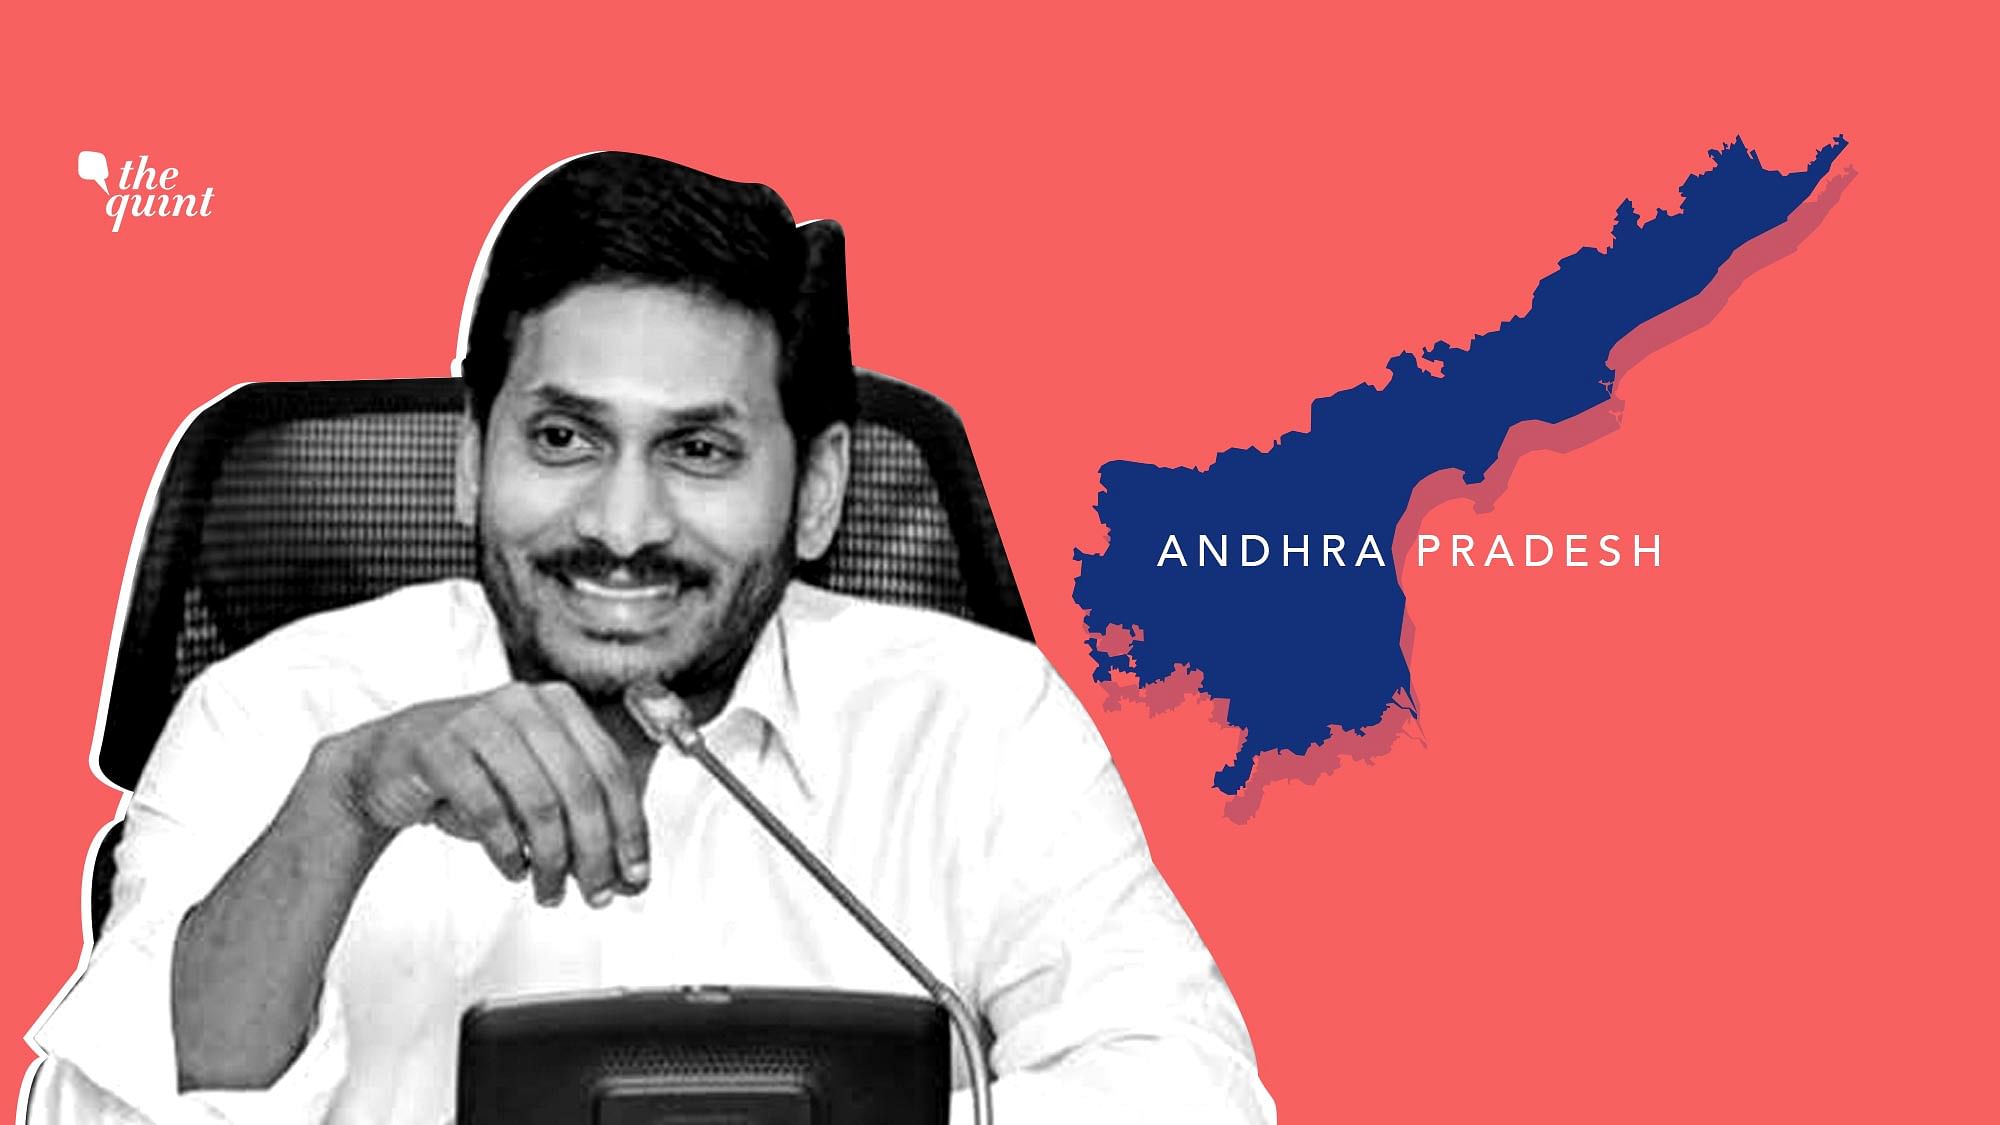 Chief Minister Jagan Reddy. Image used for representational purpose.